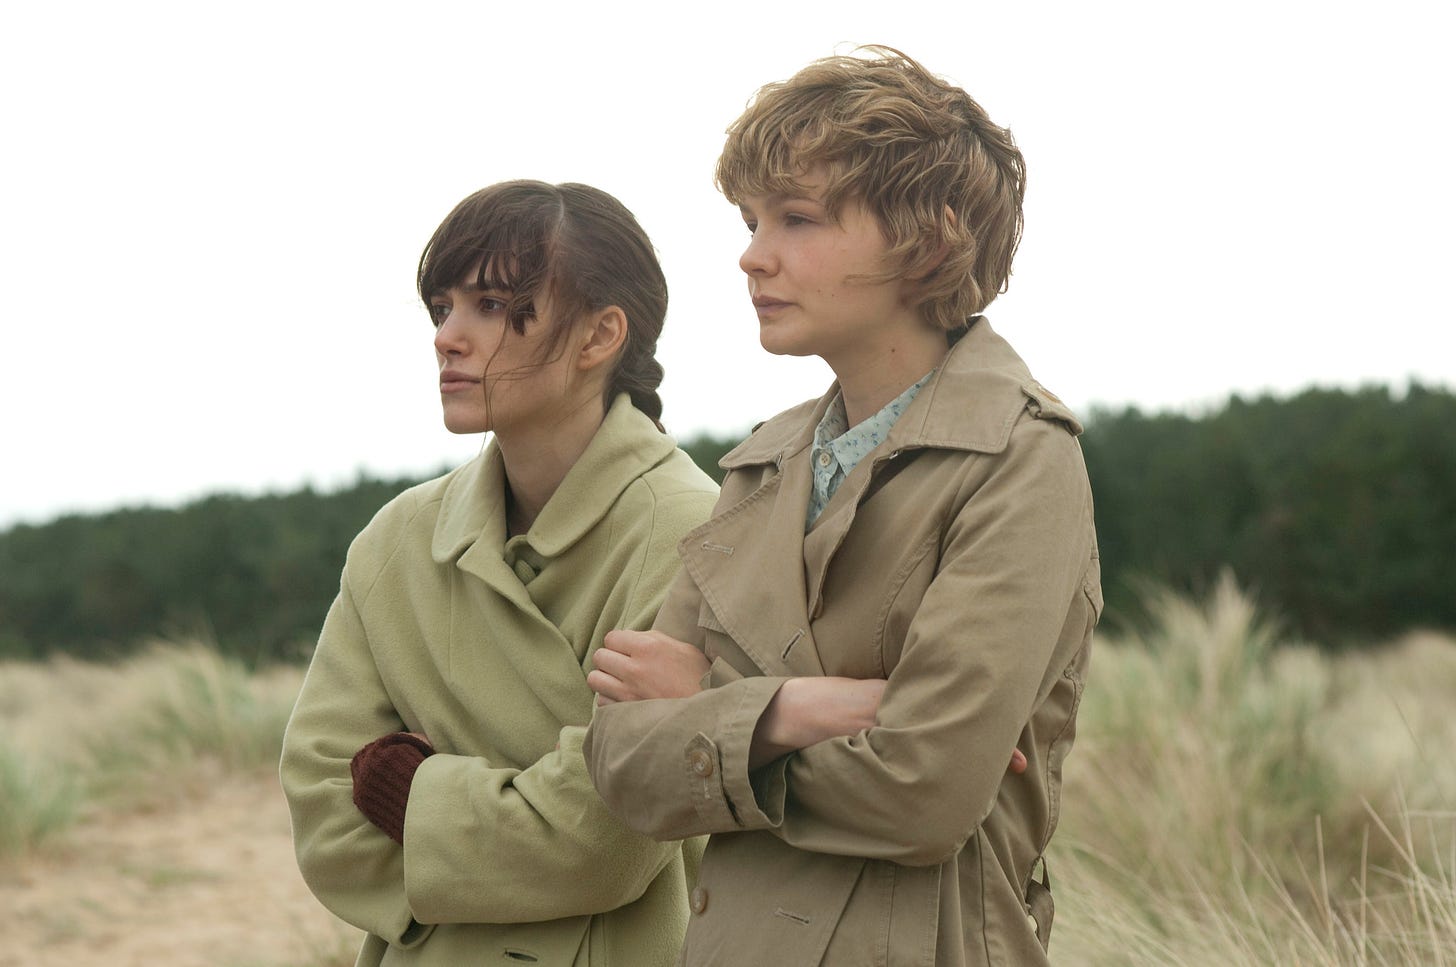 Keira Knightley and Carey Mulligan in the 2010 film of Never Let Me Go